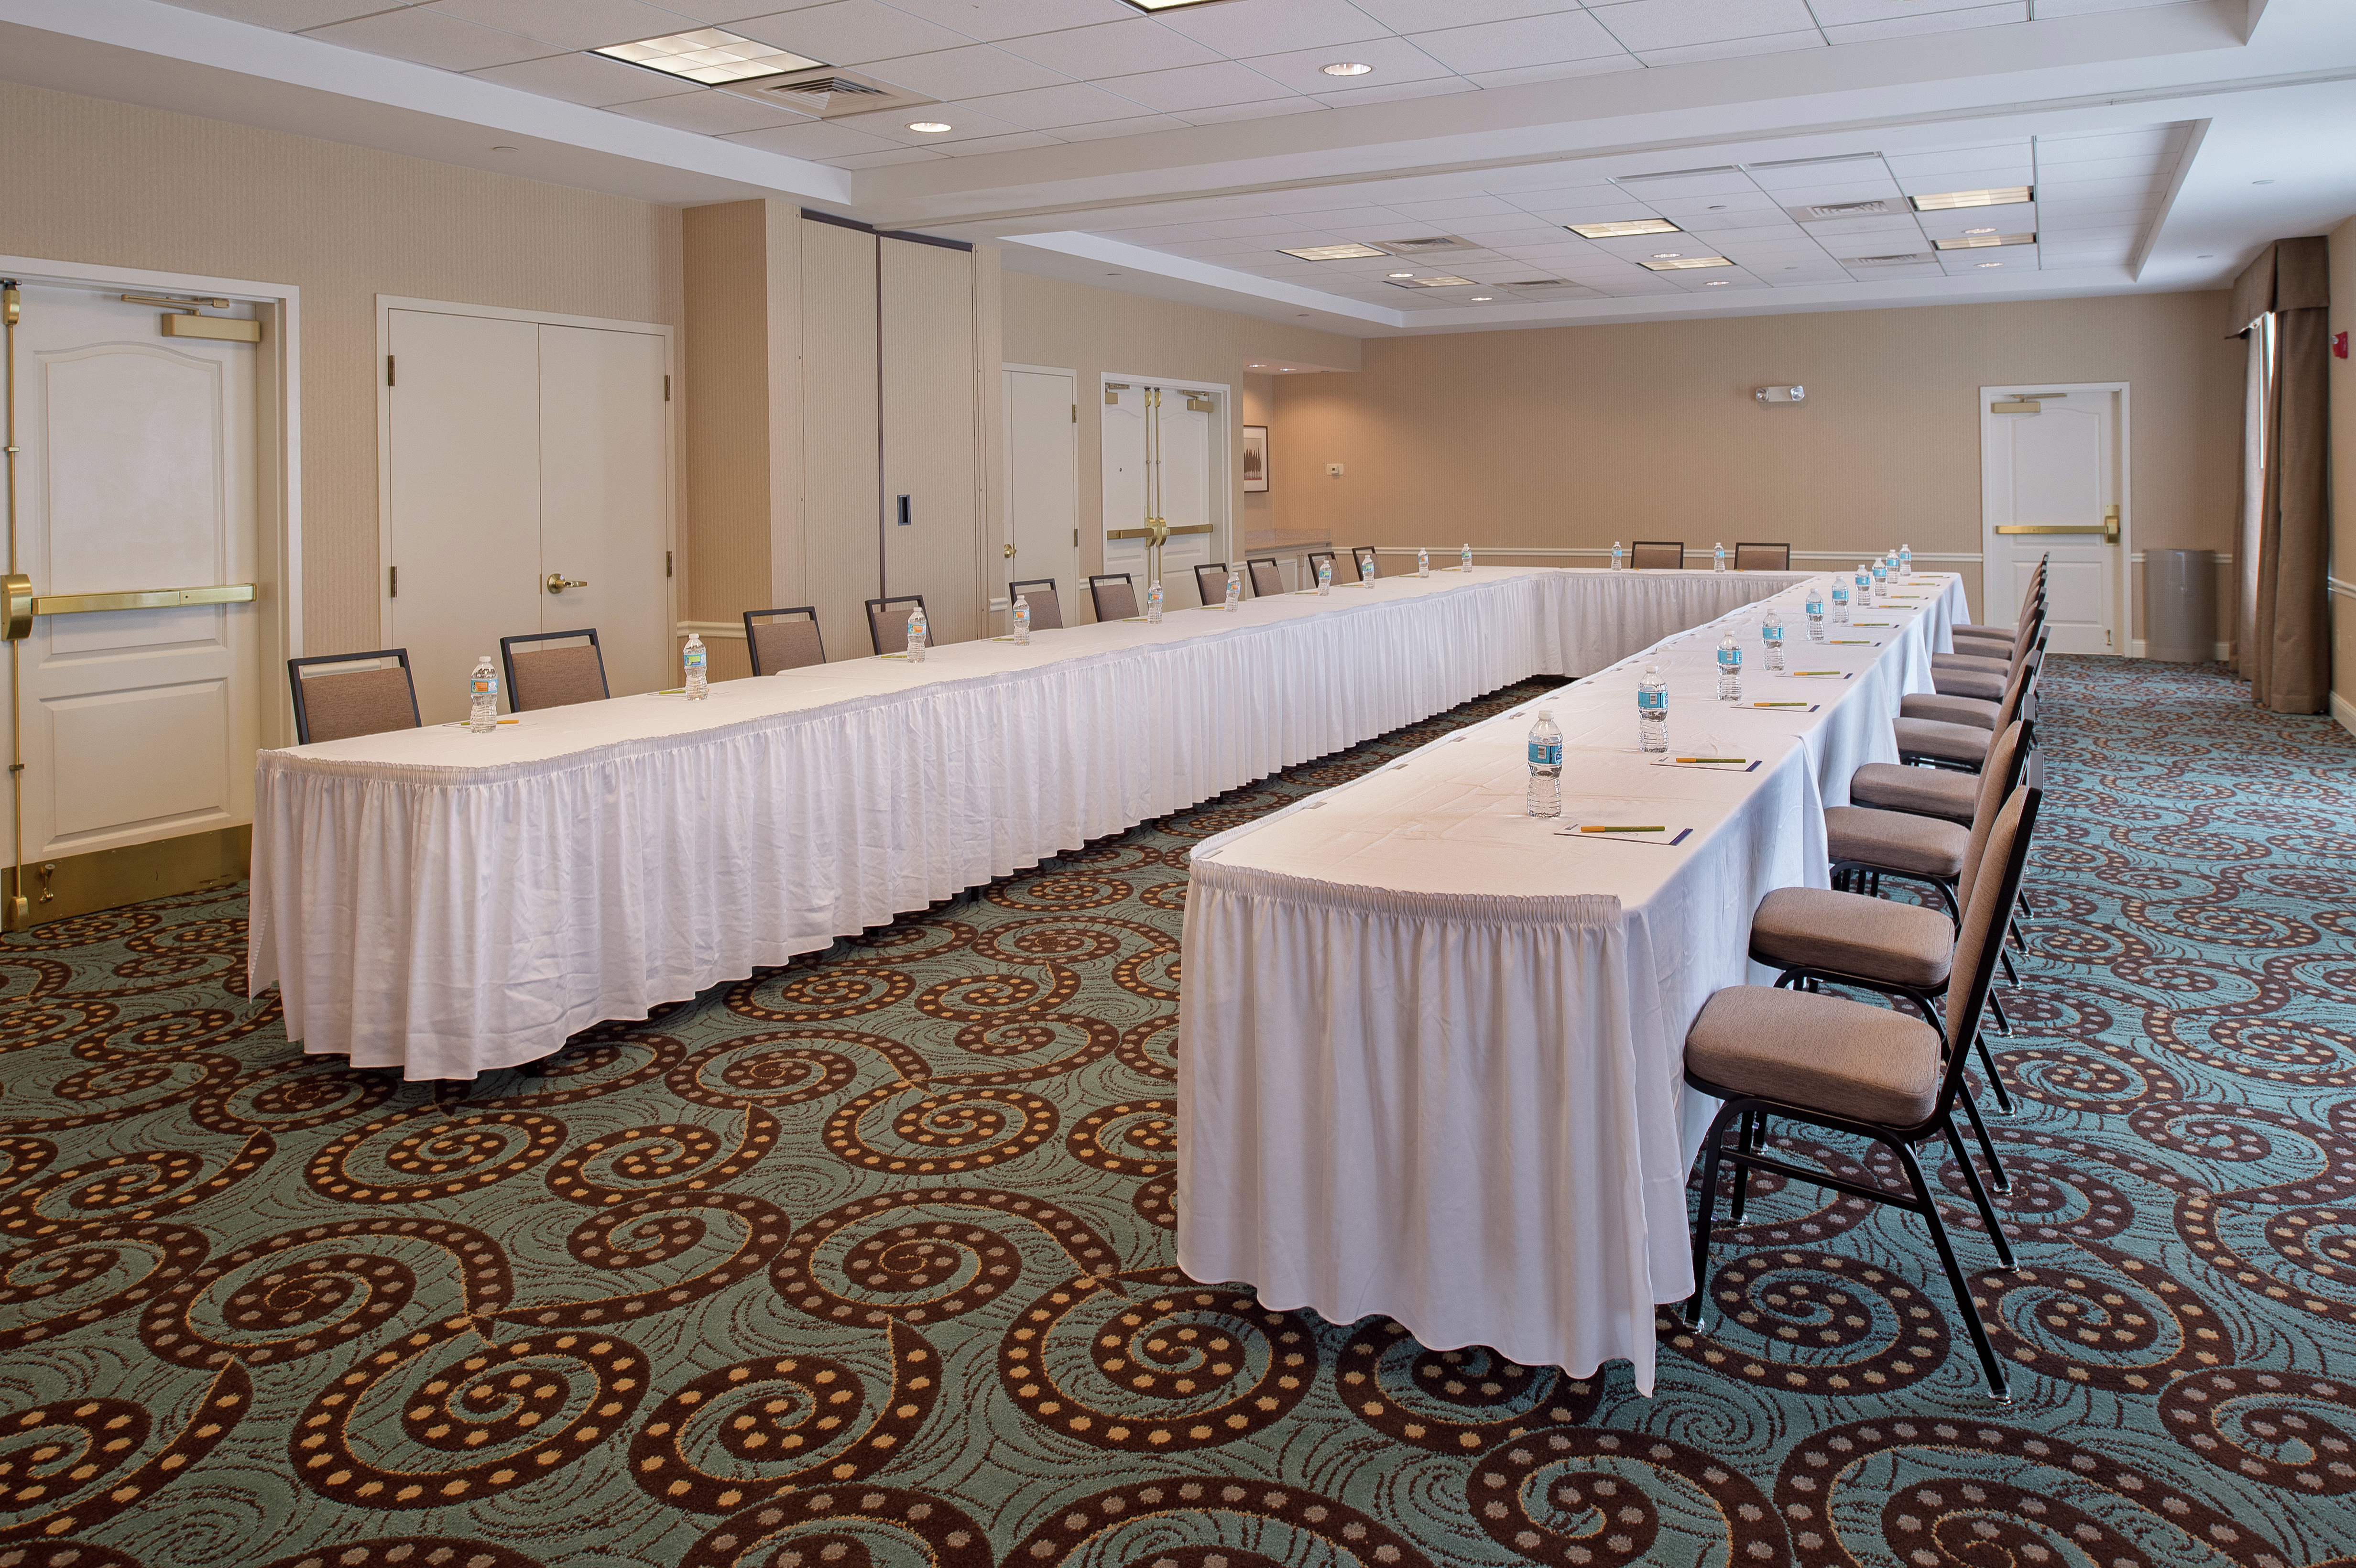 Meeting Room With U-Shaped Table, Chairs, Entry, and Windows WIth Long Drapes